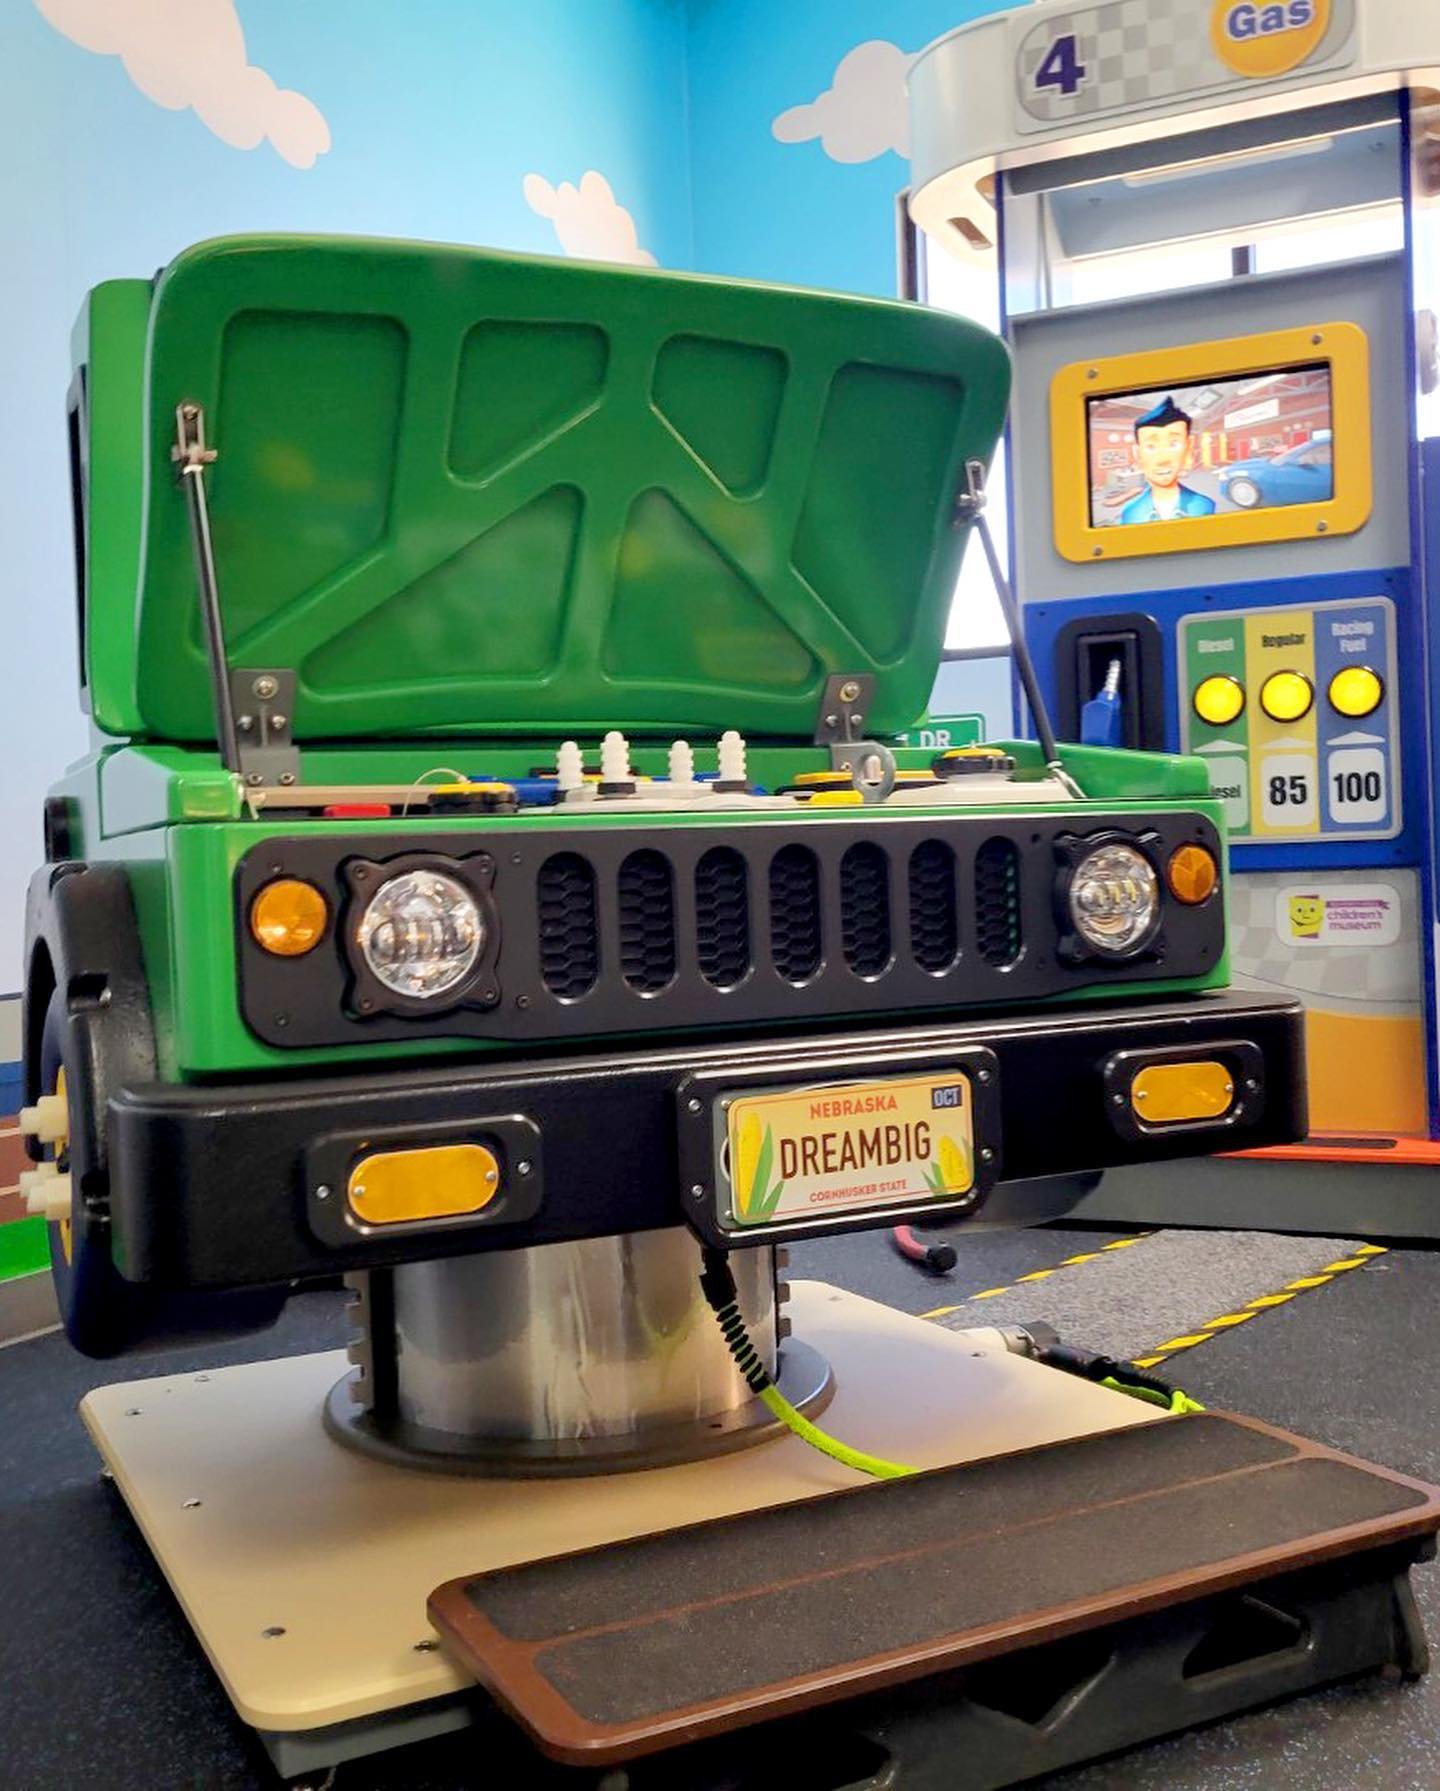 Employing both creativity and technical know-how, Andresen has helped to fabricate countless museum exhibits throughout the bay area!

Checkout our latest work on the &quot;Beep&quot; exhibit, an interactive car mechanics play exhibit designed by BIG